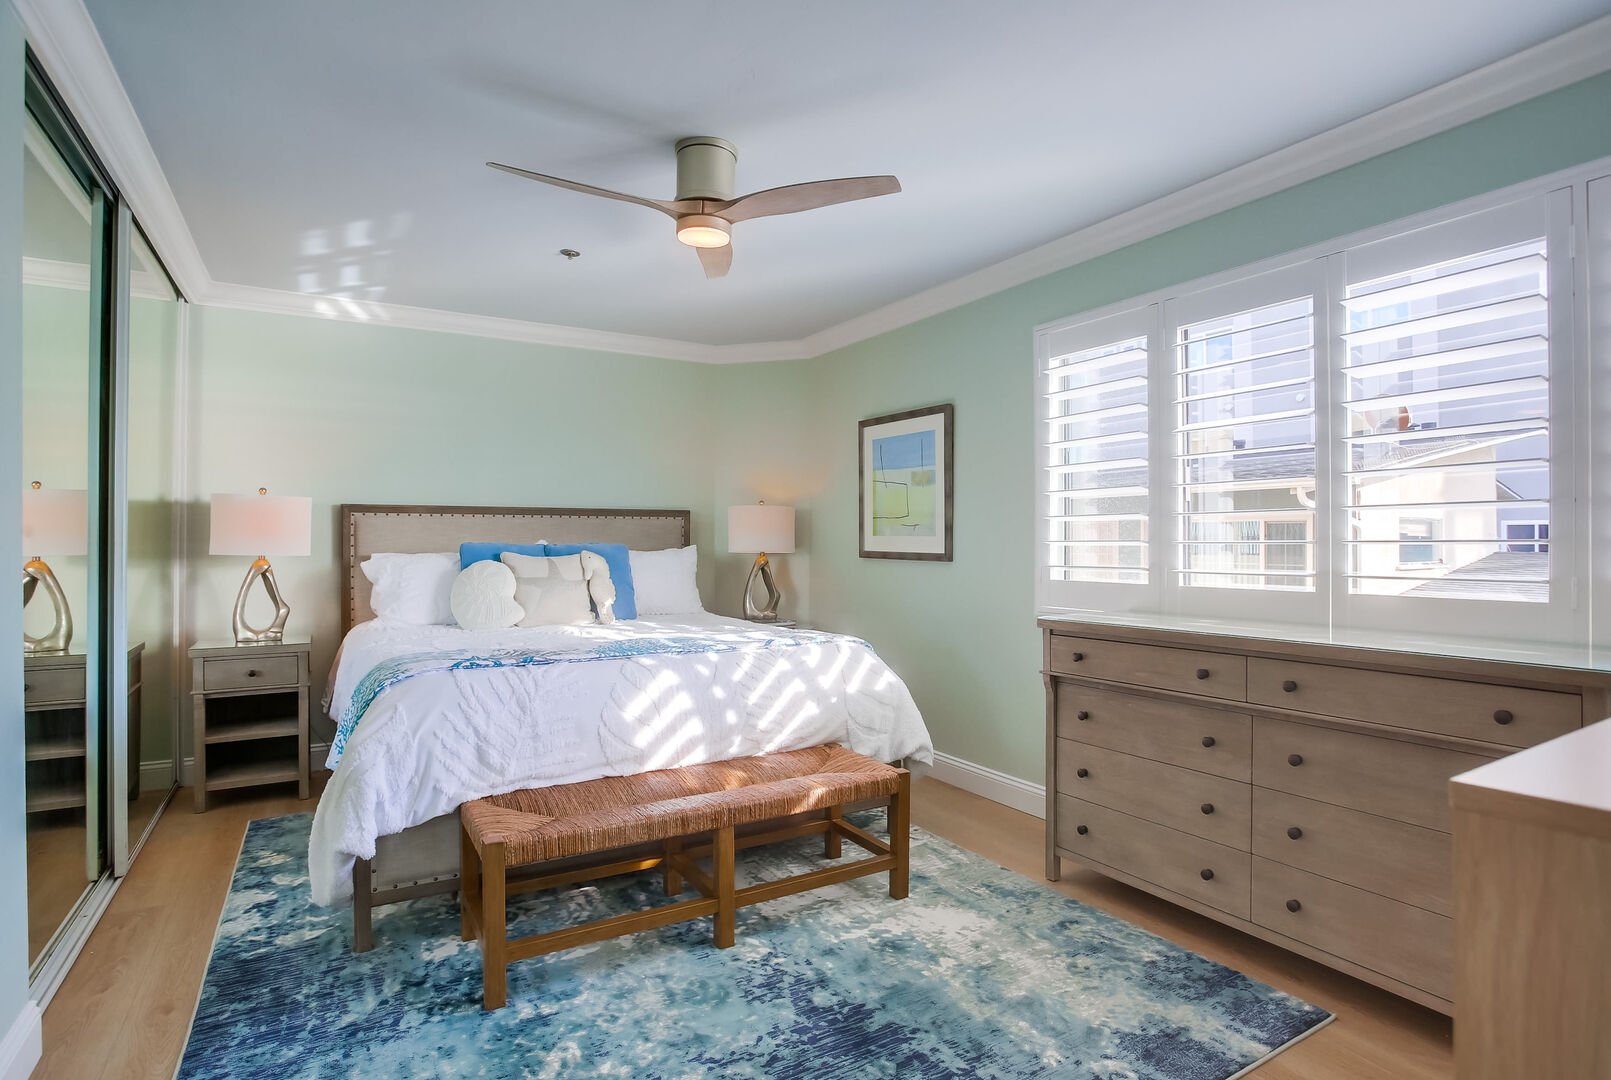 Single bedroom with king bed, overhead lighting and remote-controlled fan, large mirrored closets, all new furniture, flooring, blinds, and decor!